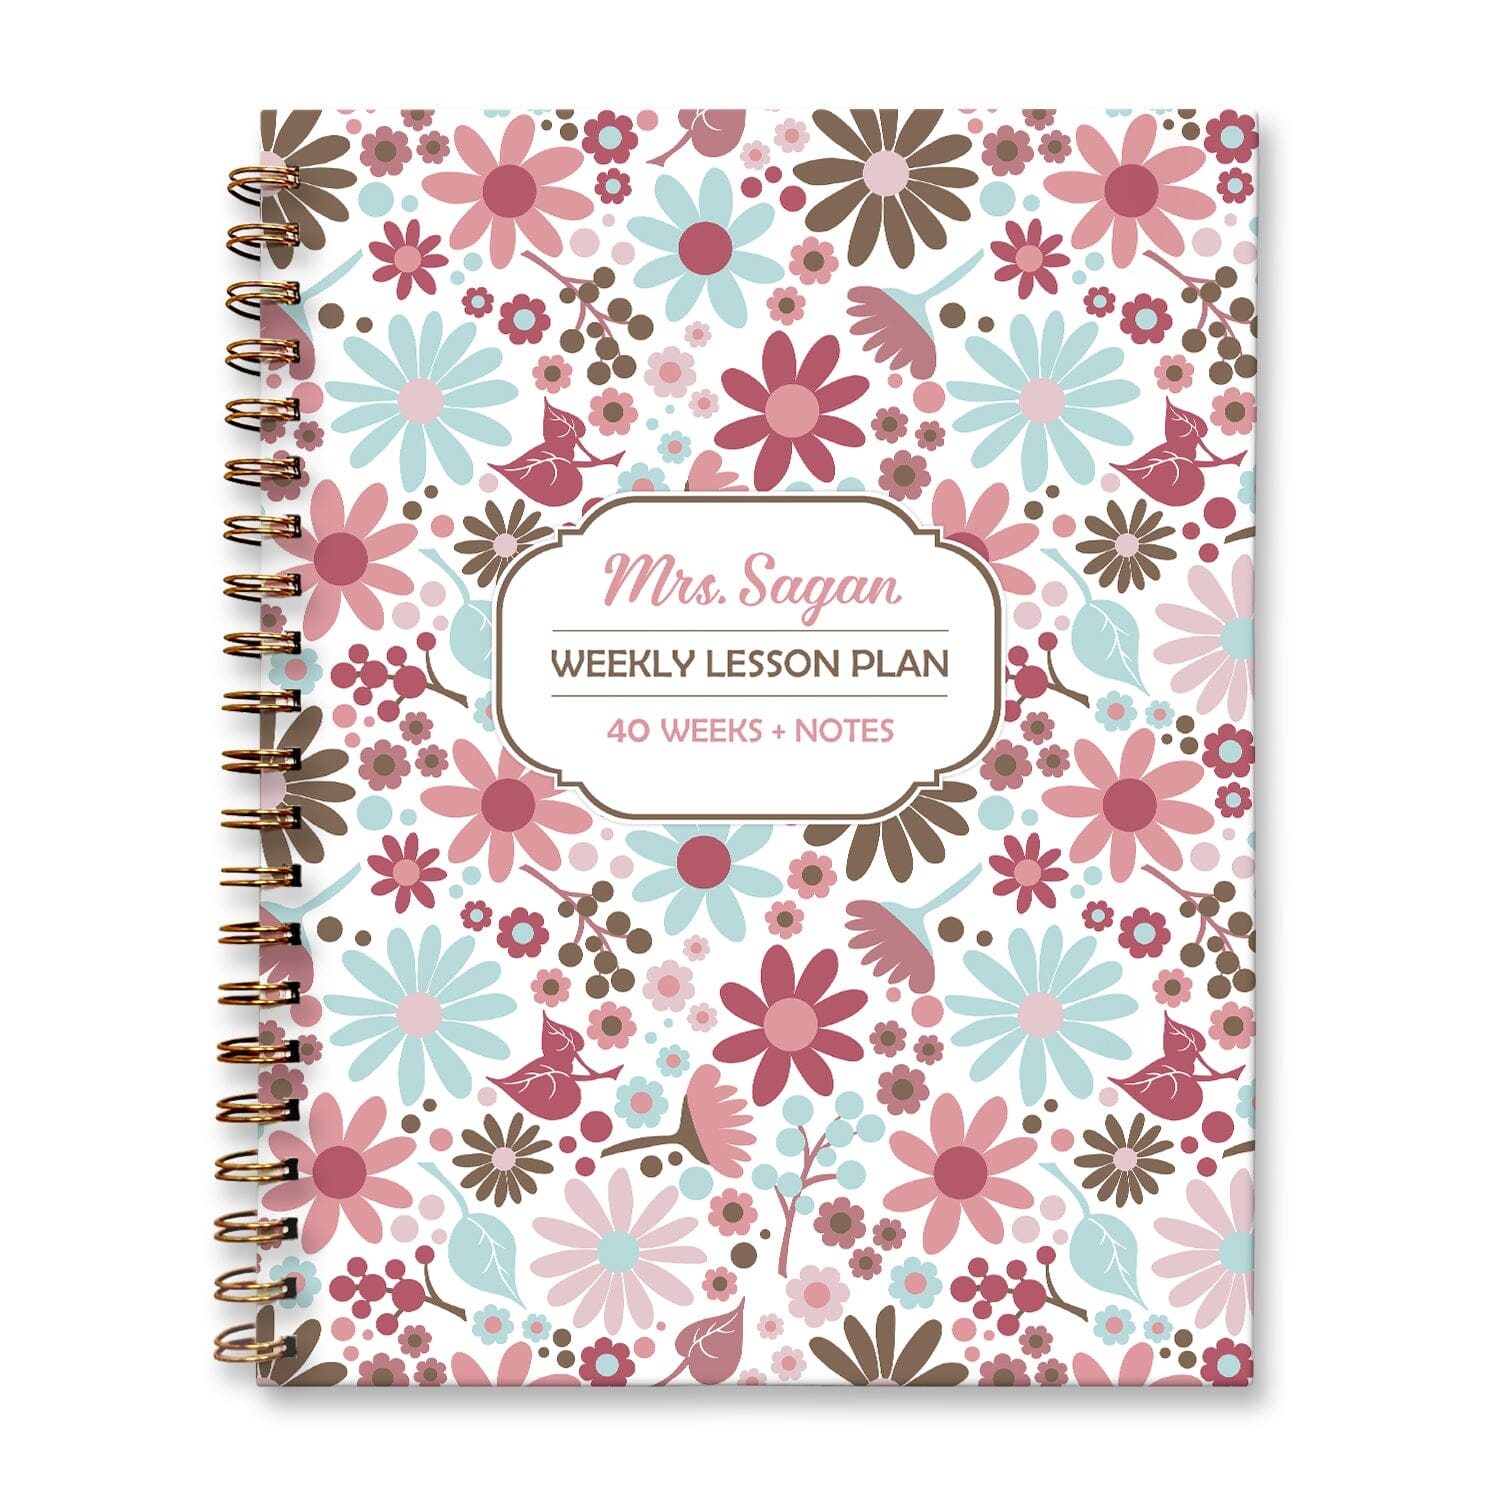 Personalized Berry Blue Flowers Weekly Lesson Plan Book at Artistically Invited. Hardcover planner book for teachers or homeschooling.